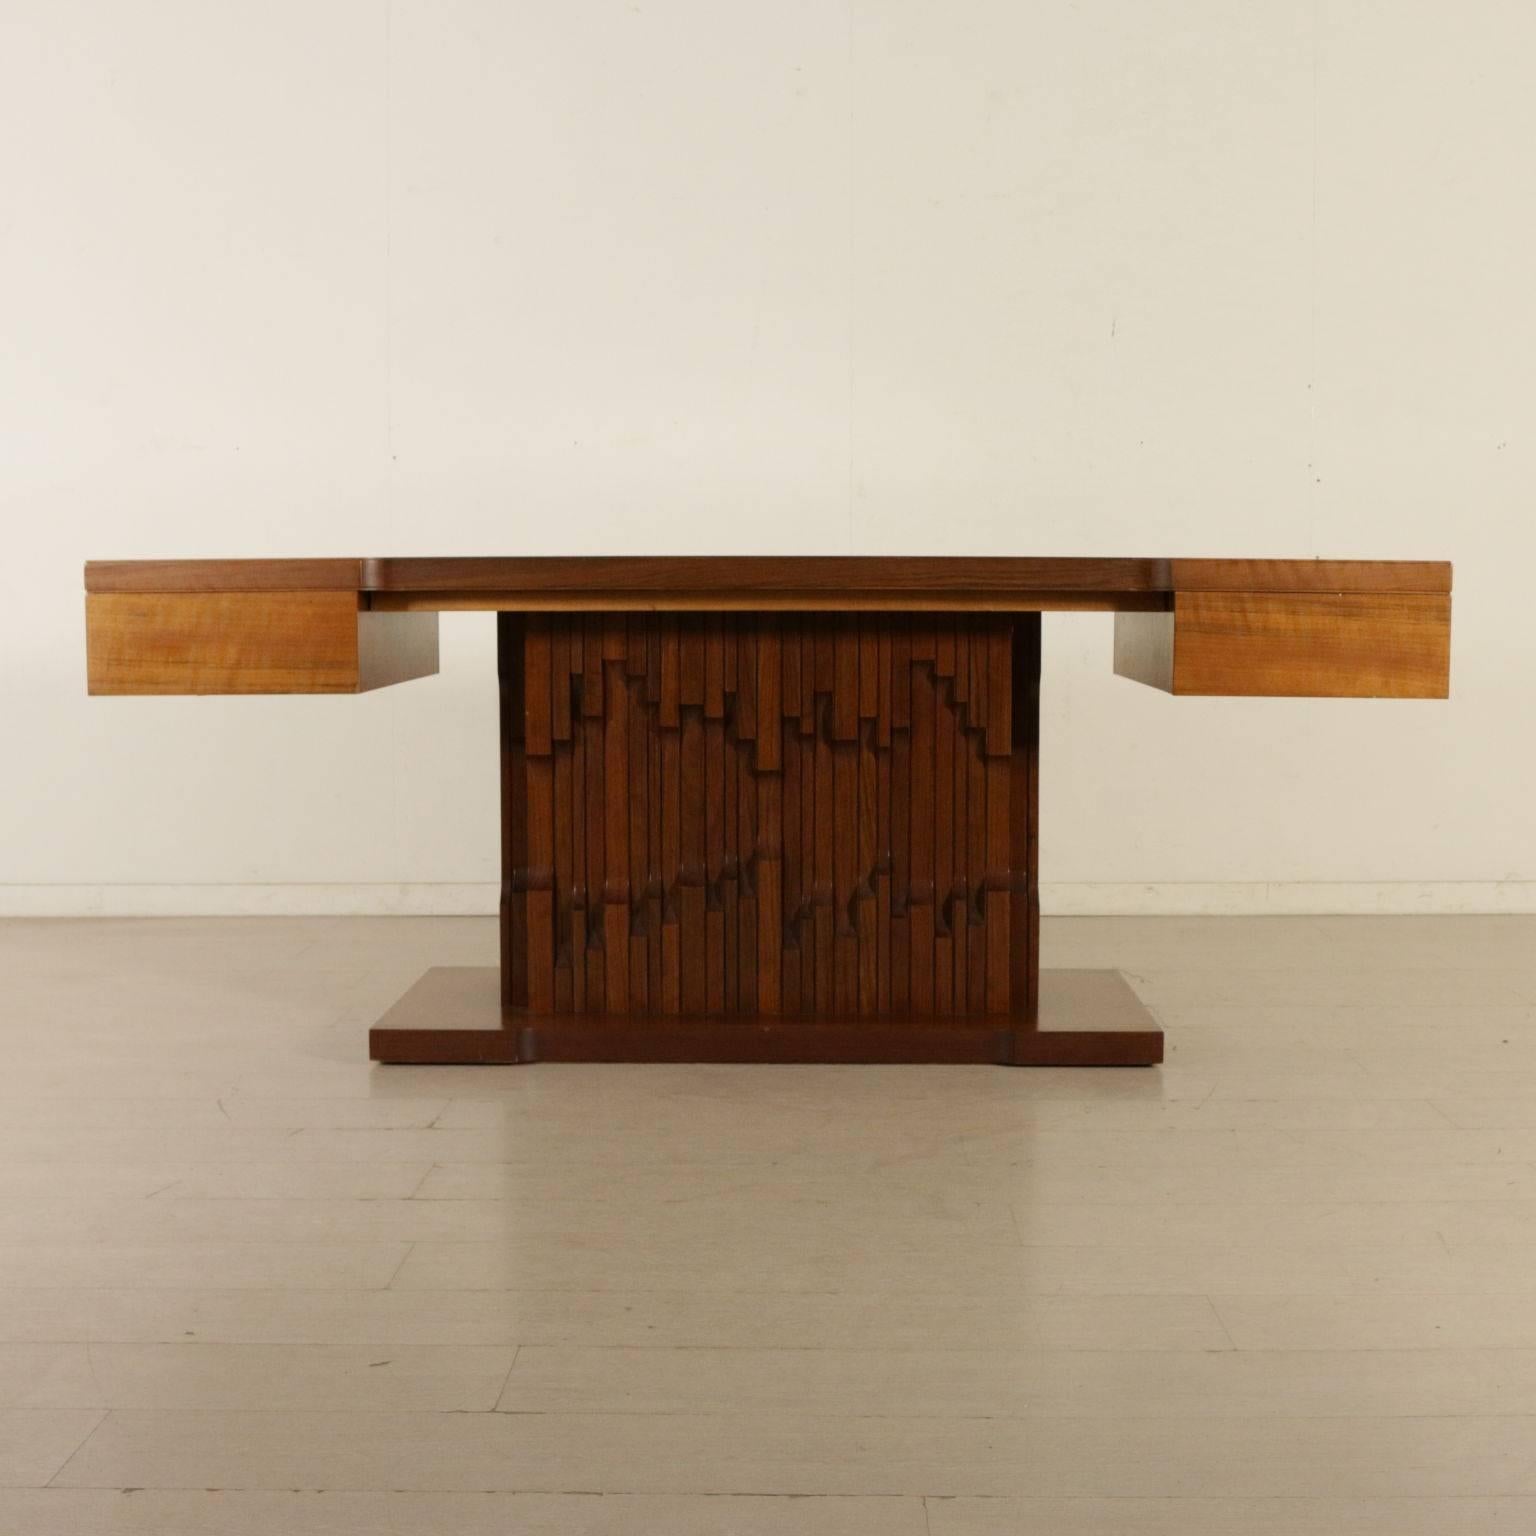 A desk with lateral drawers designed by Luciano Frigerio (1928-1999) for Frigerio, solid wood, African walnut veneer. Model: Norman. Manufactured in Desio, Italy, 1970s.